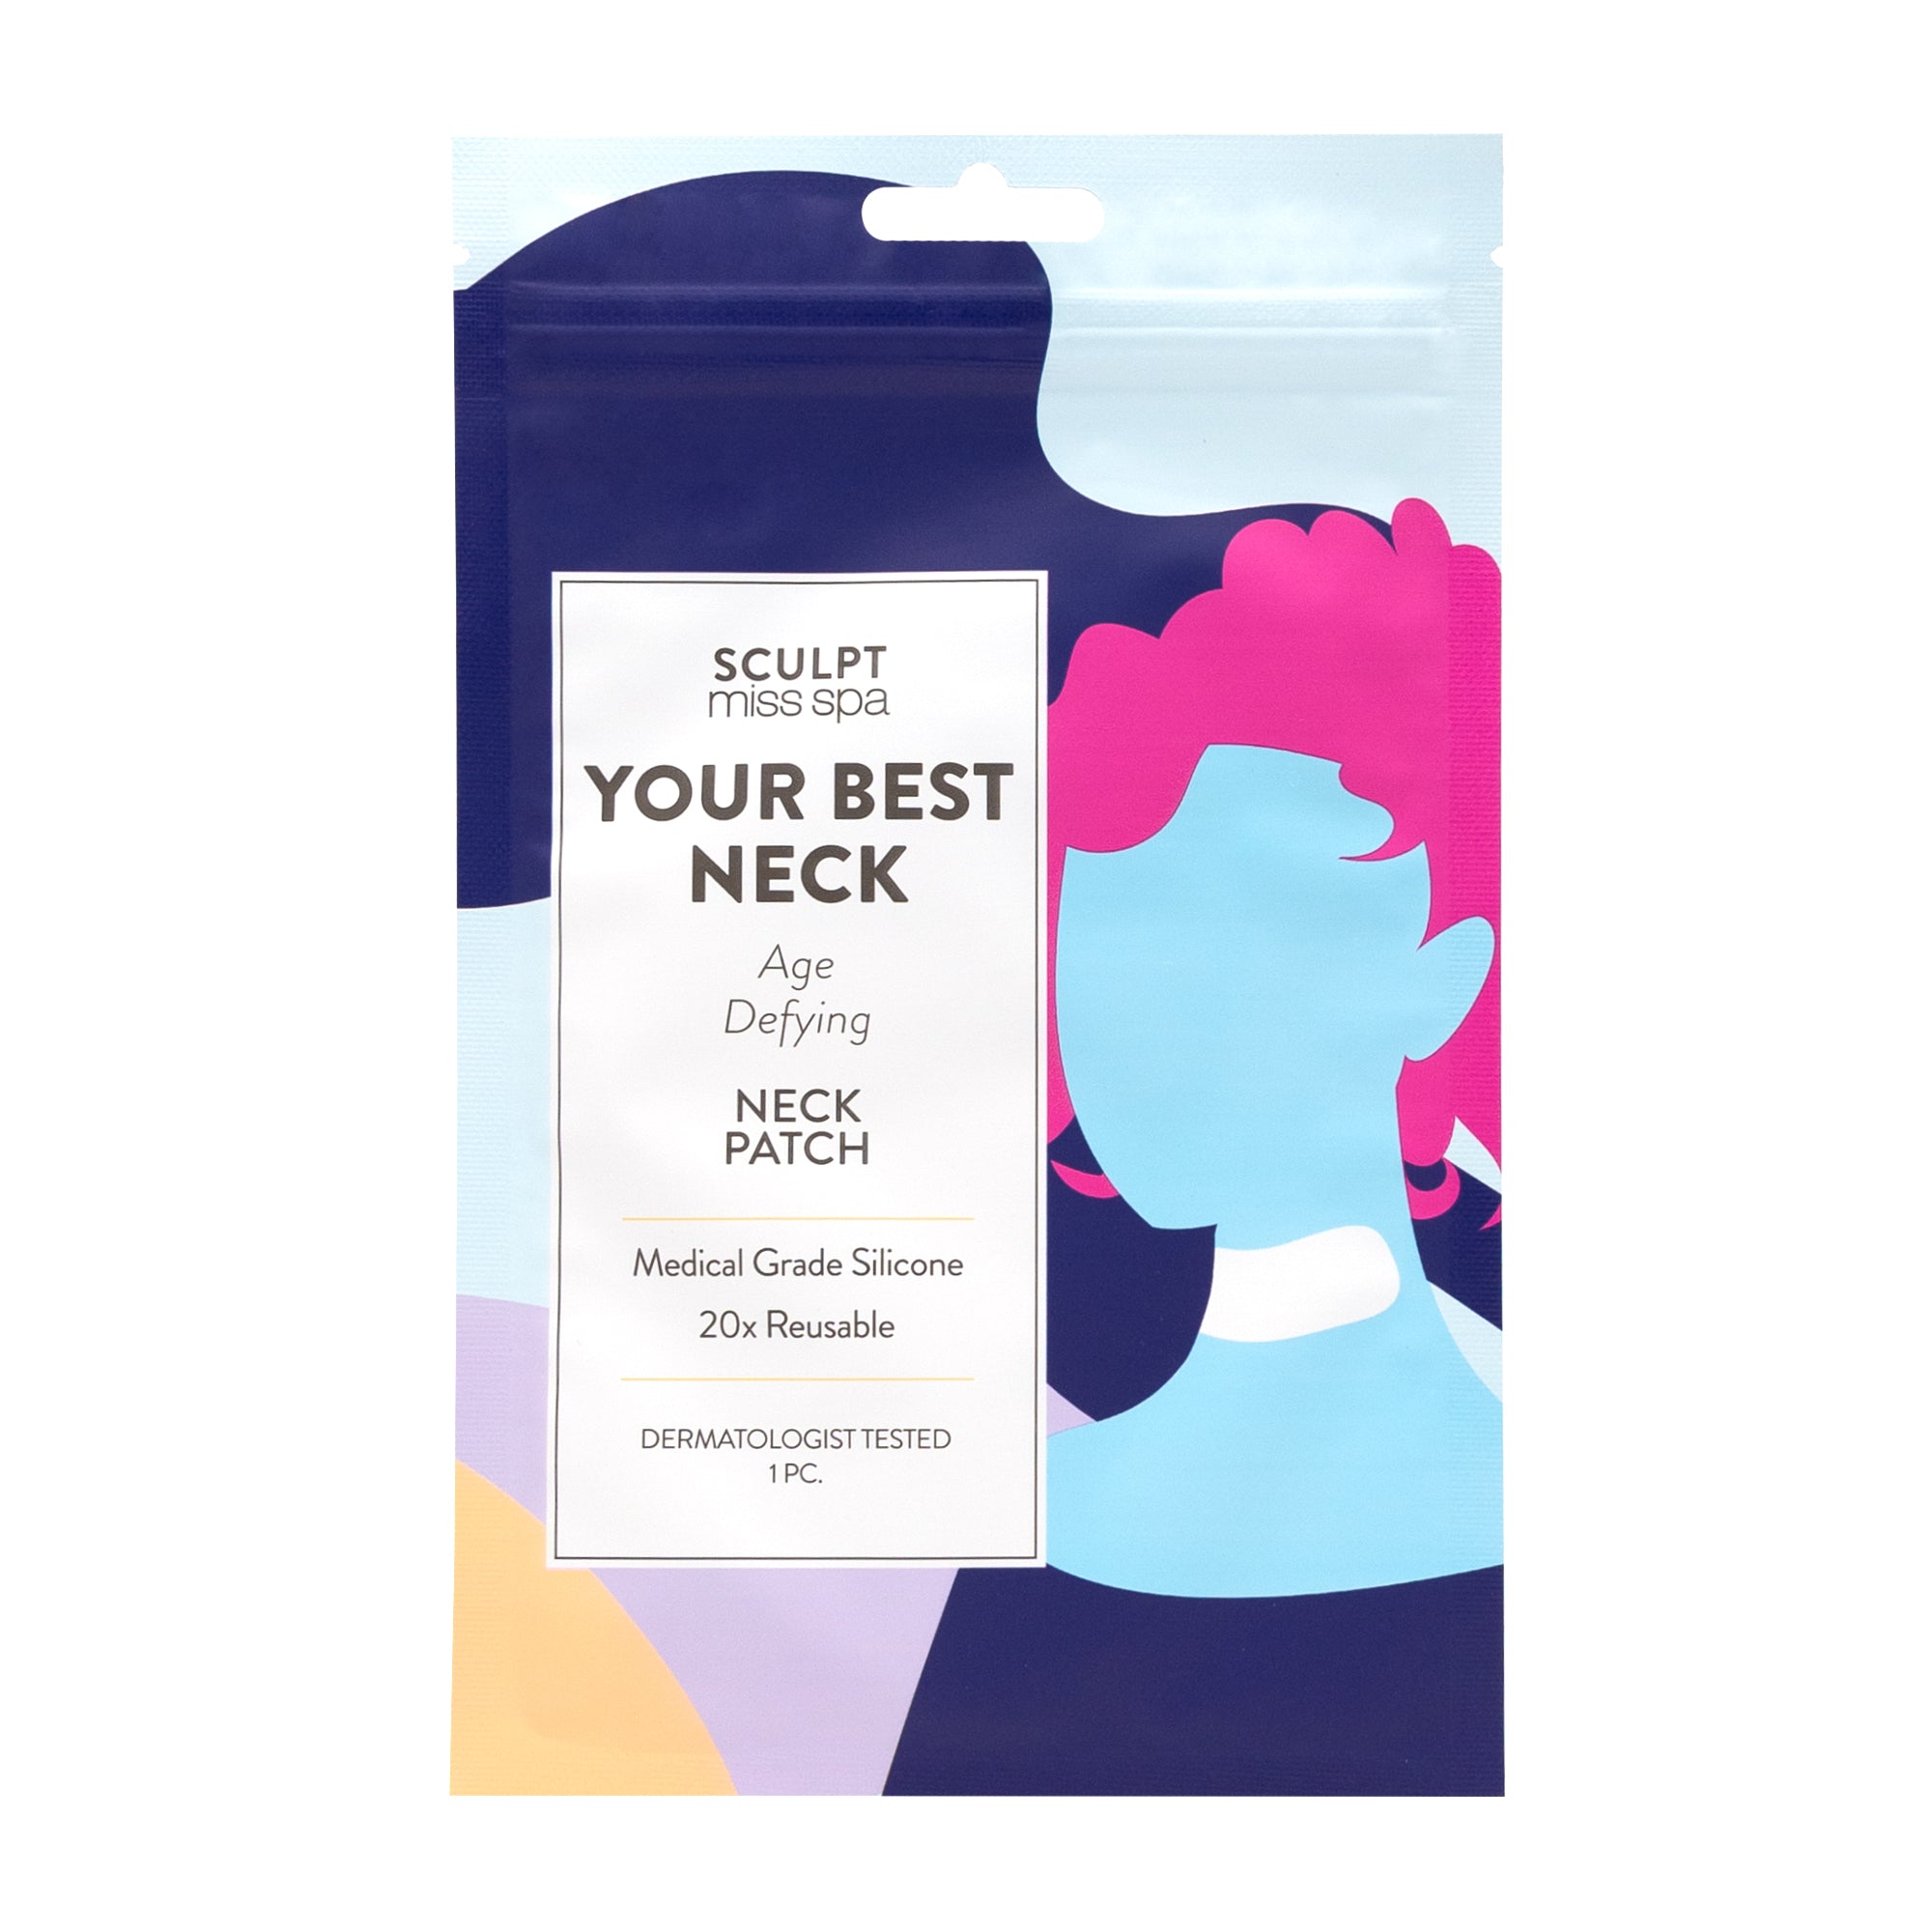 YOUR BEST NECK Age Defying Neck Patch